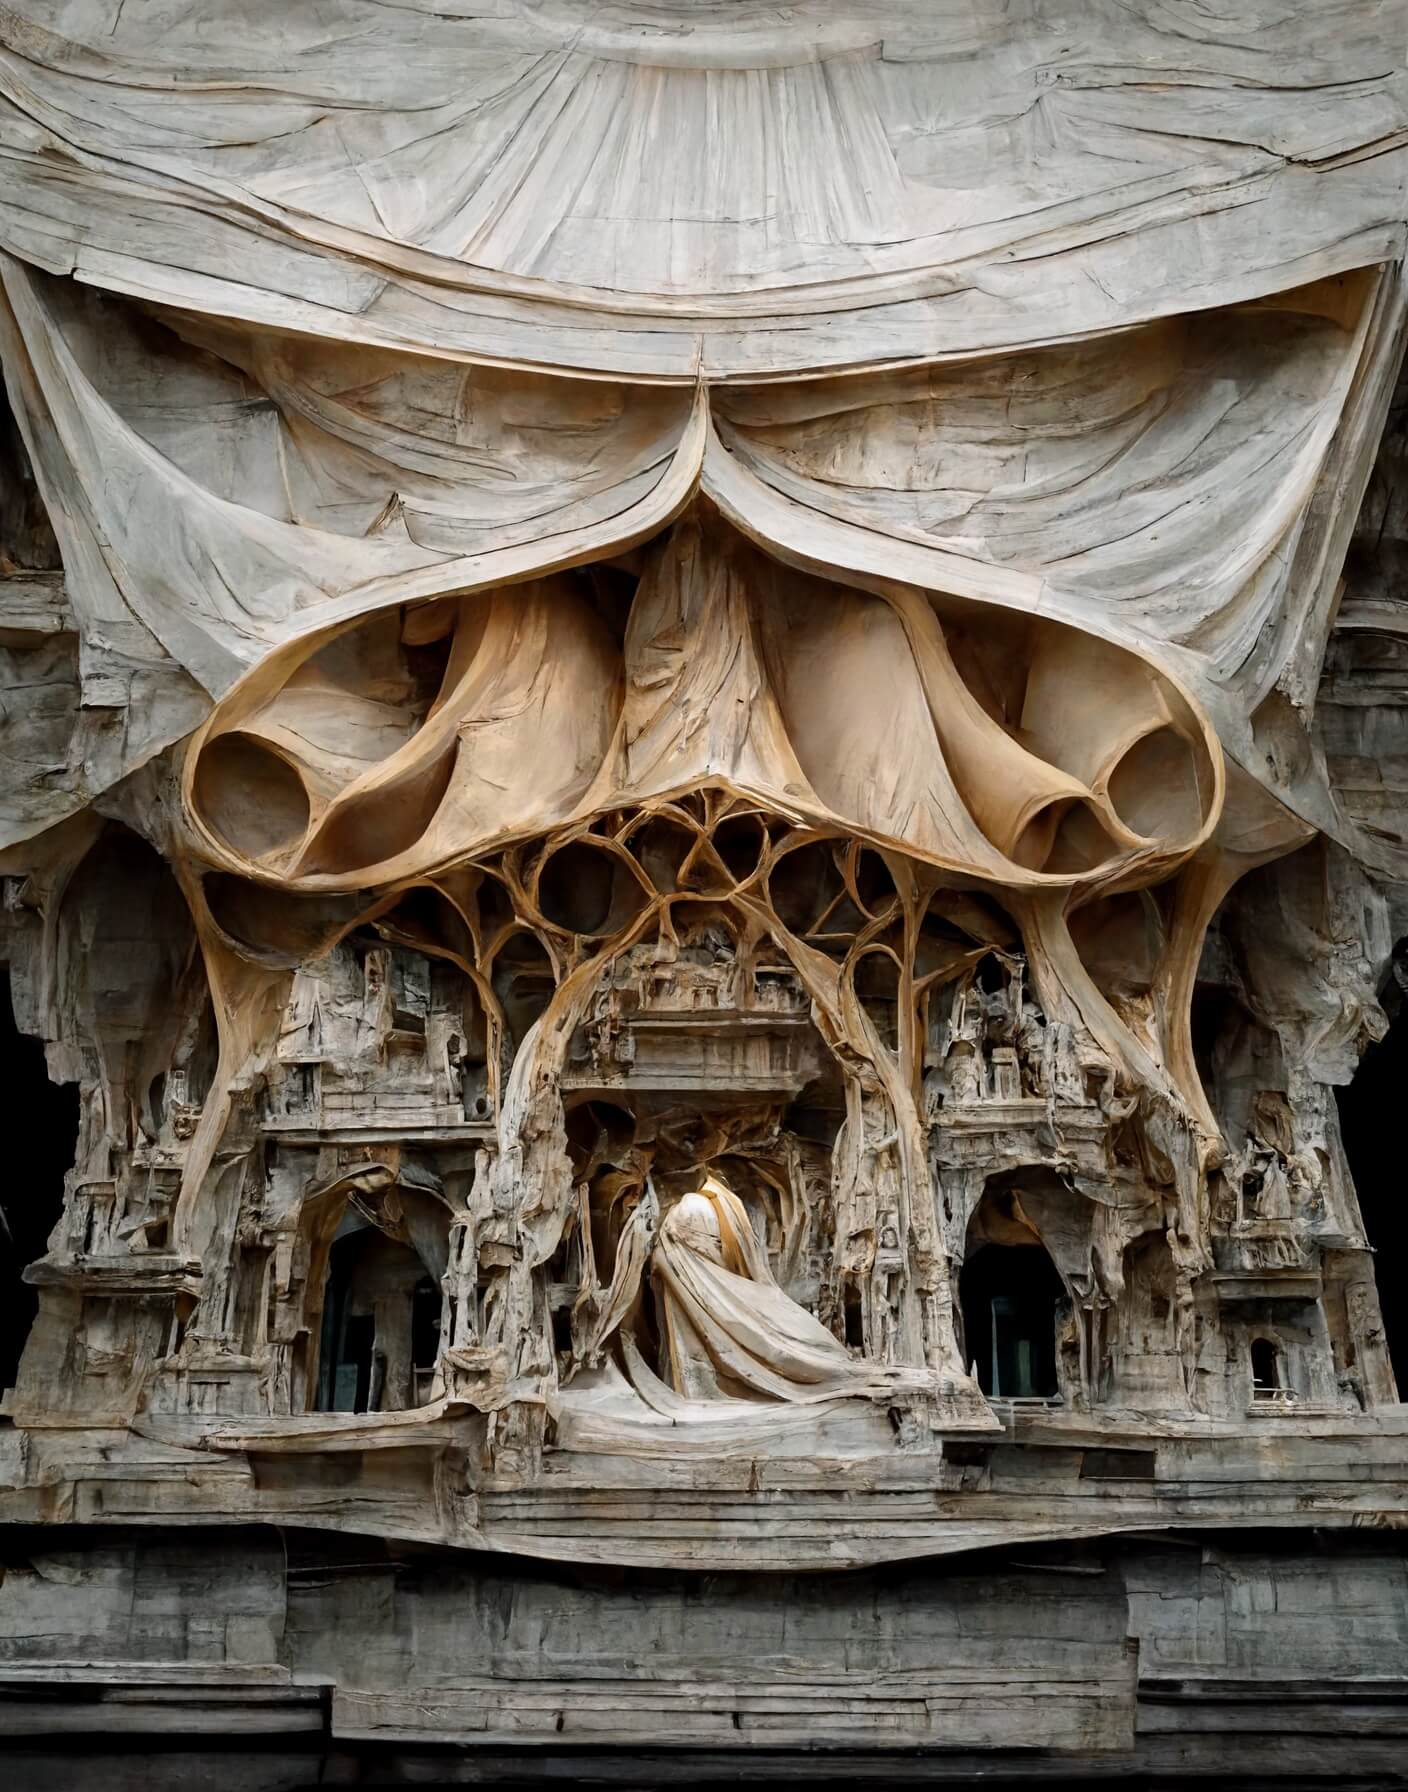 Renaissance and Baroque Facades Experiments with Tensile Structure by Mohammad Qasim Iqbal + Midjourney